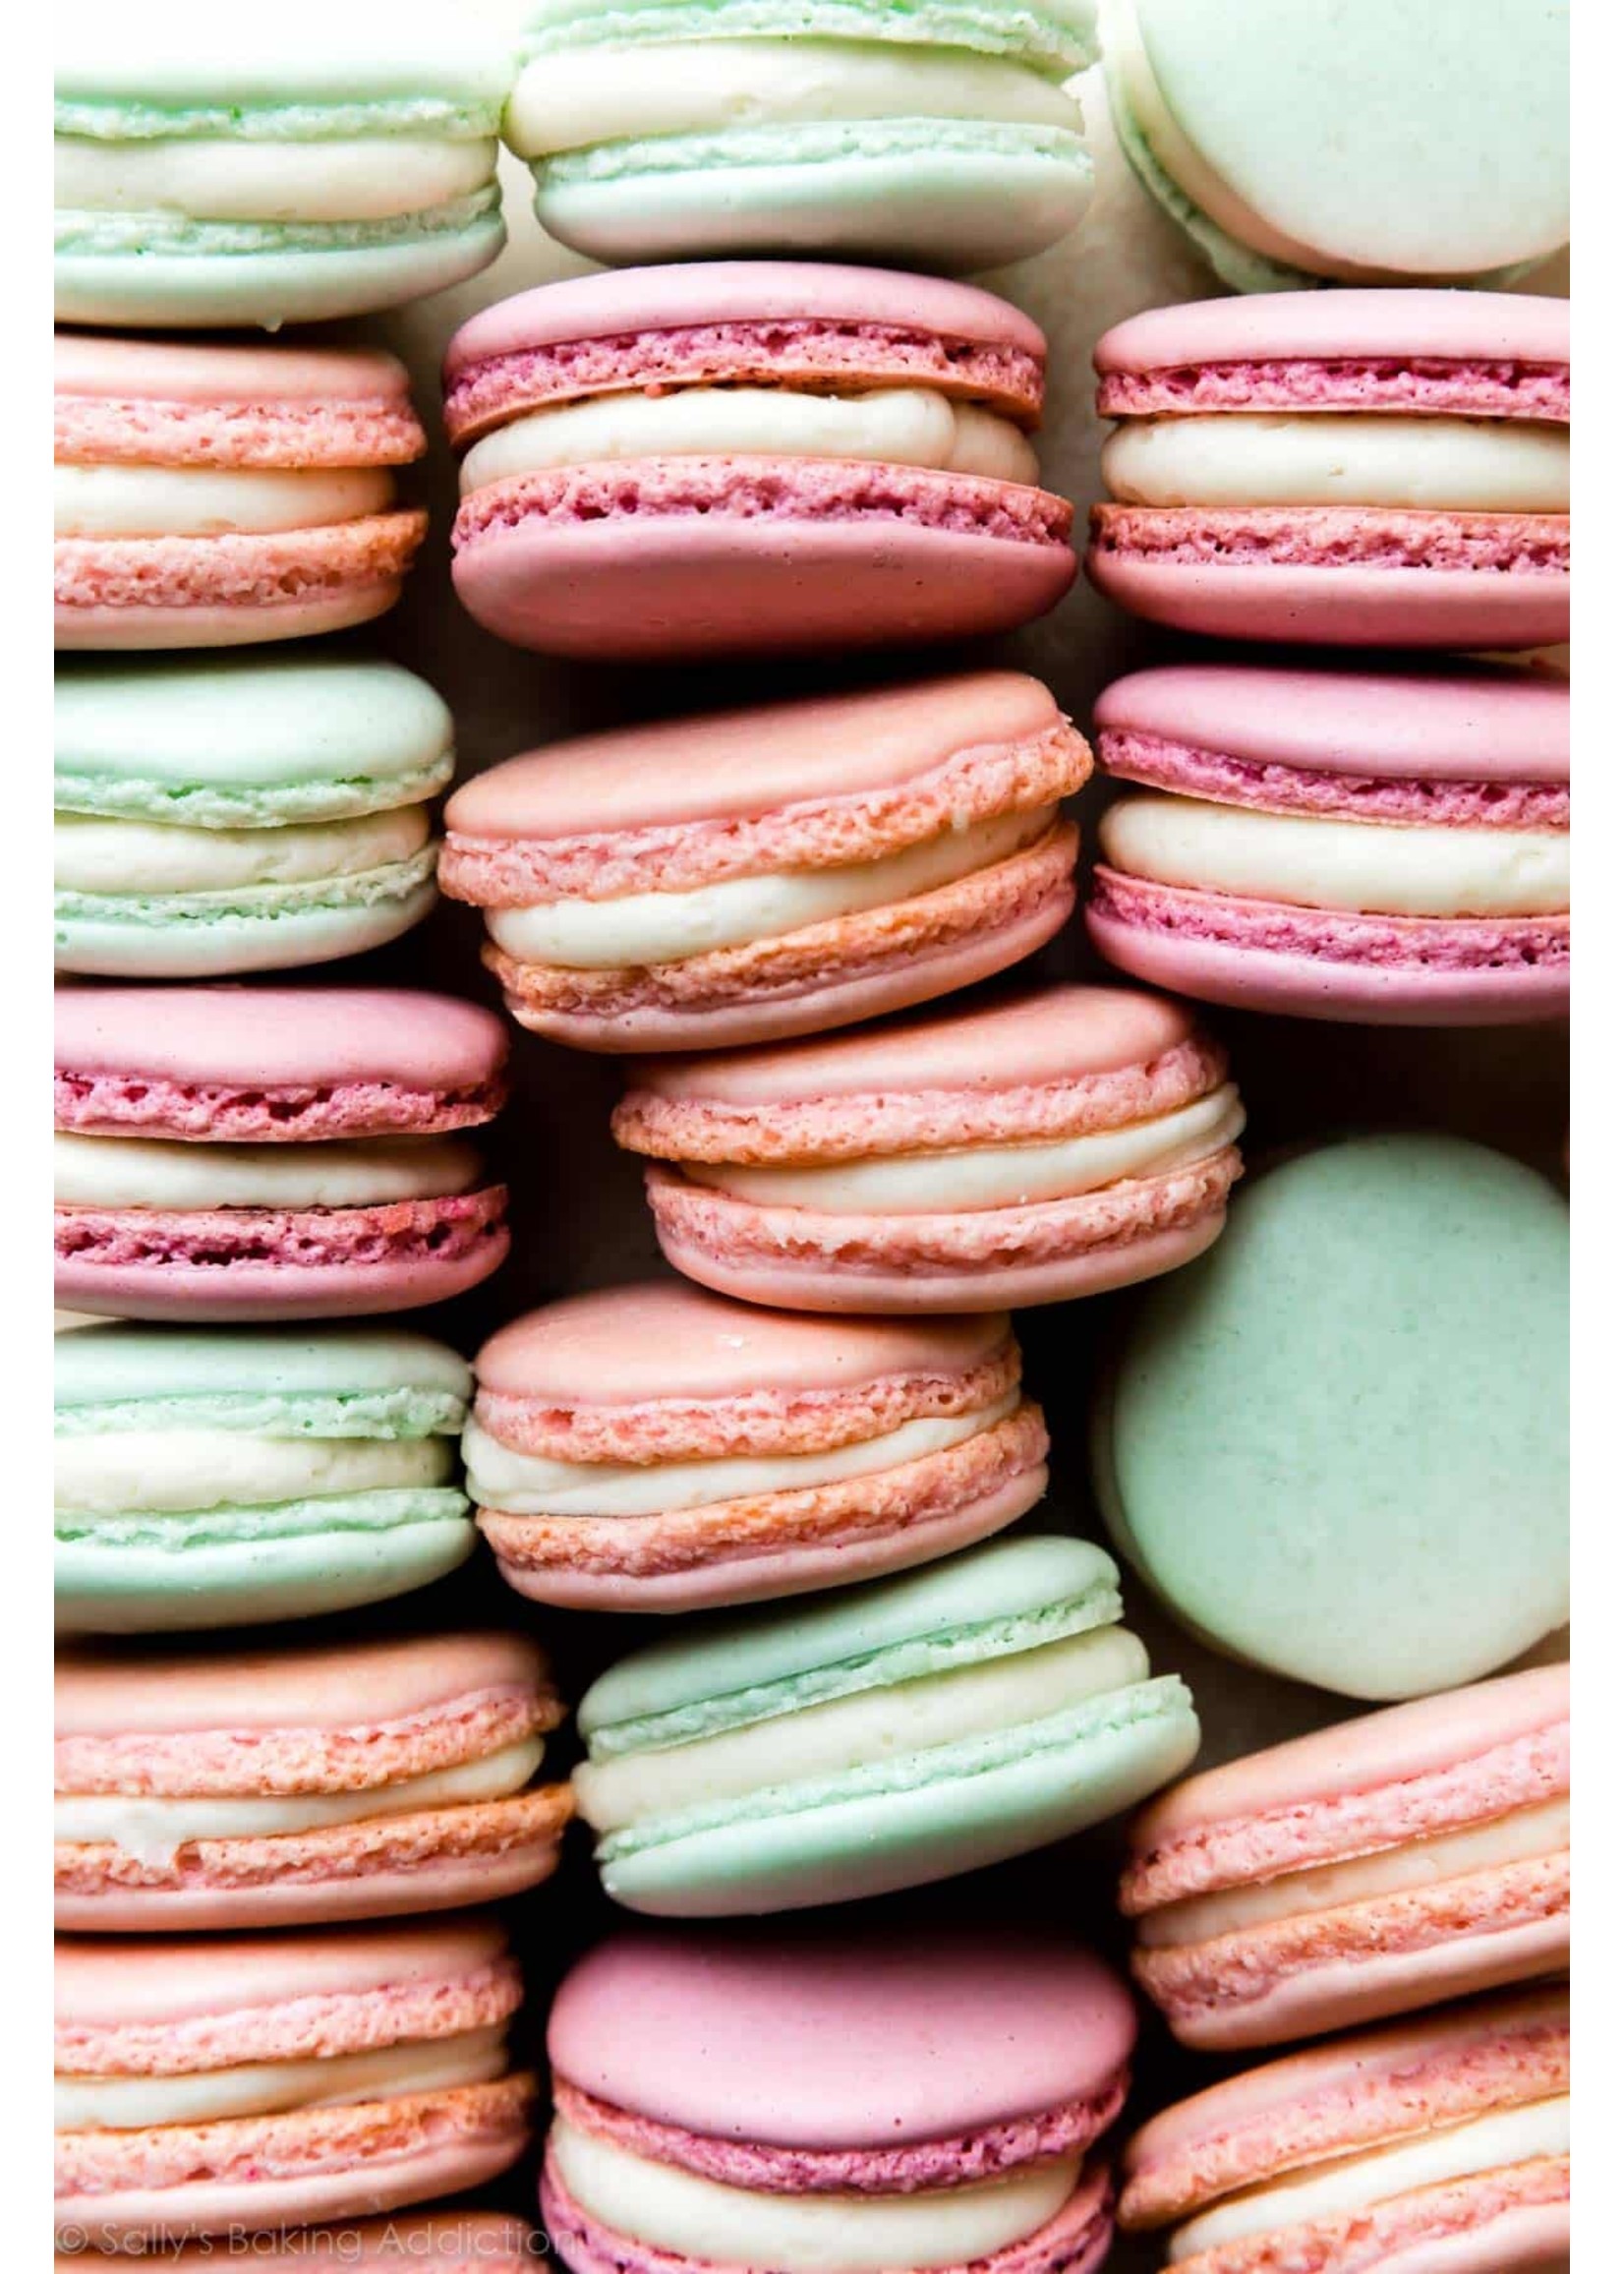 10/11/22 Macarons (Workshop) SOLD OUT